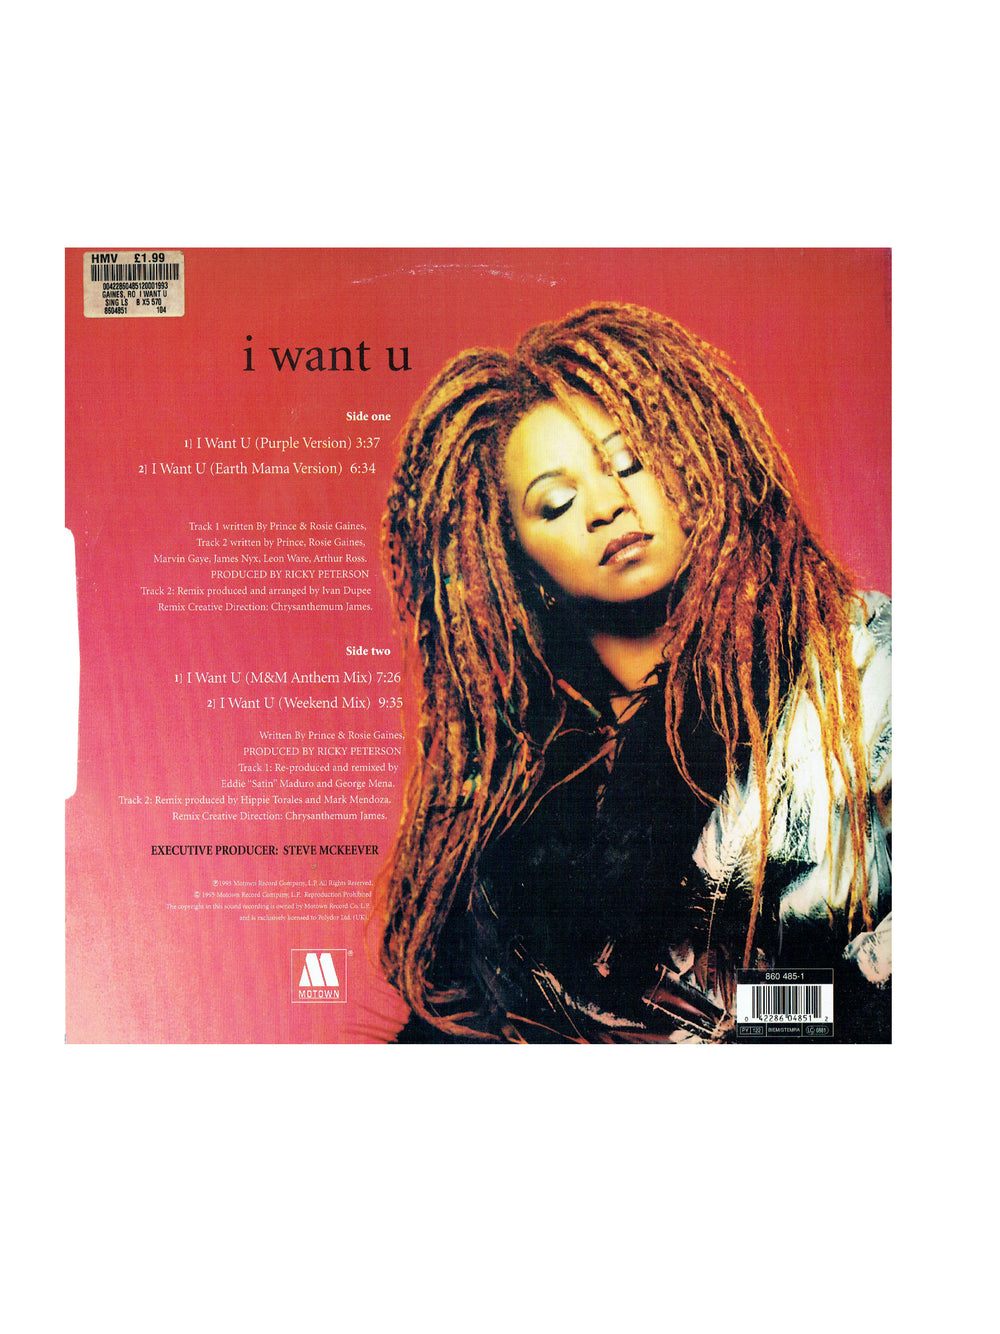 Prince – Rosie Gaines I Want U 12 Inch Vinyl Single EU Release Written By Prince  AS